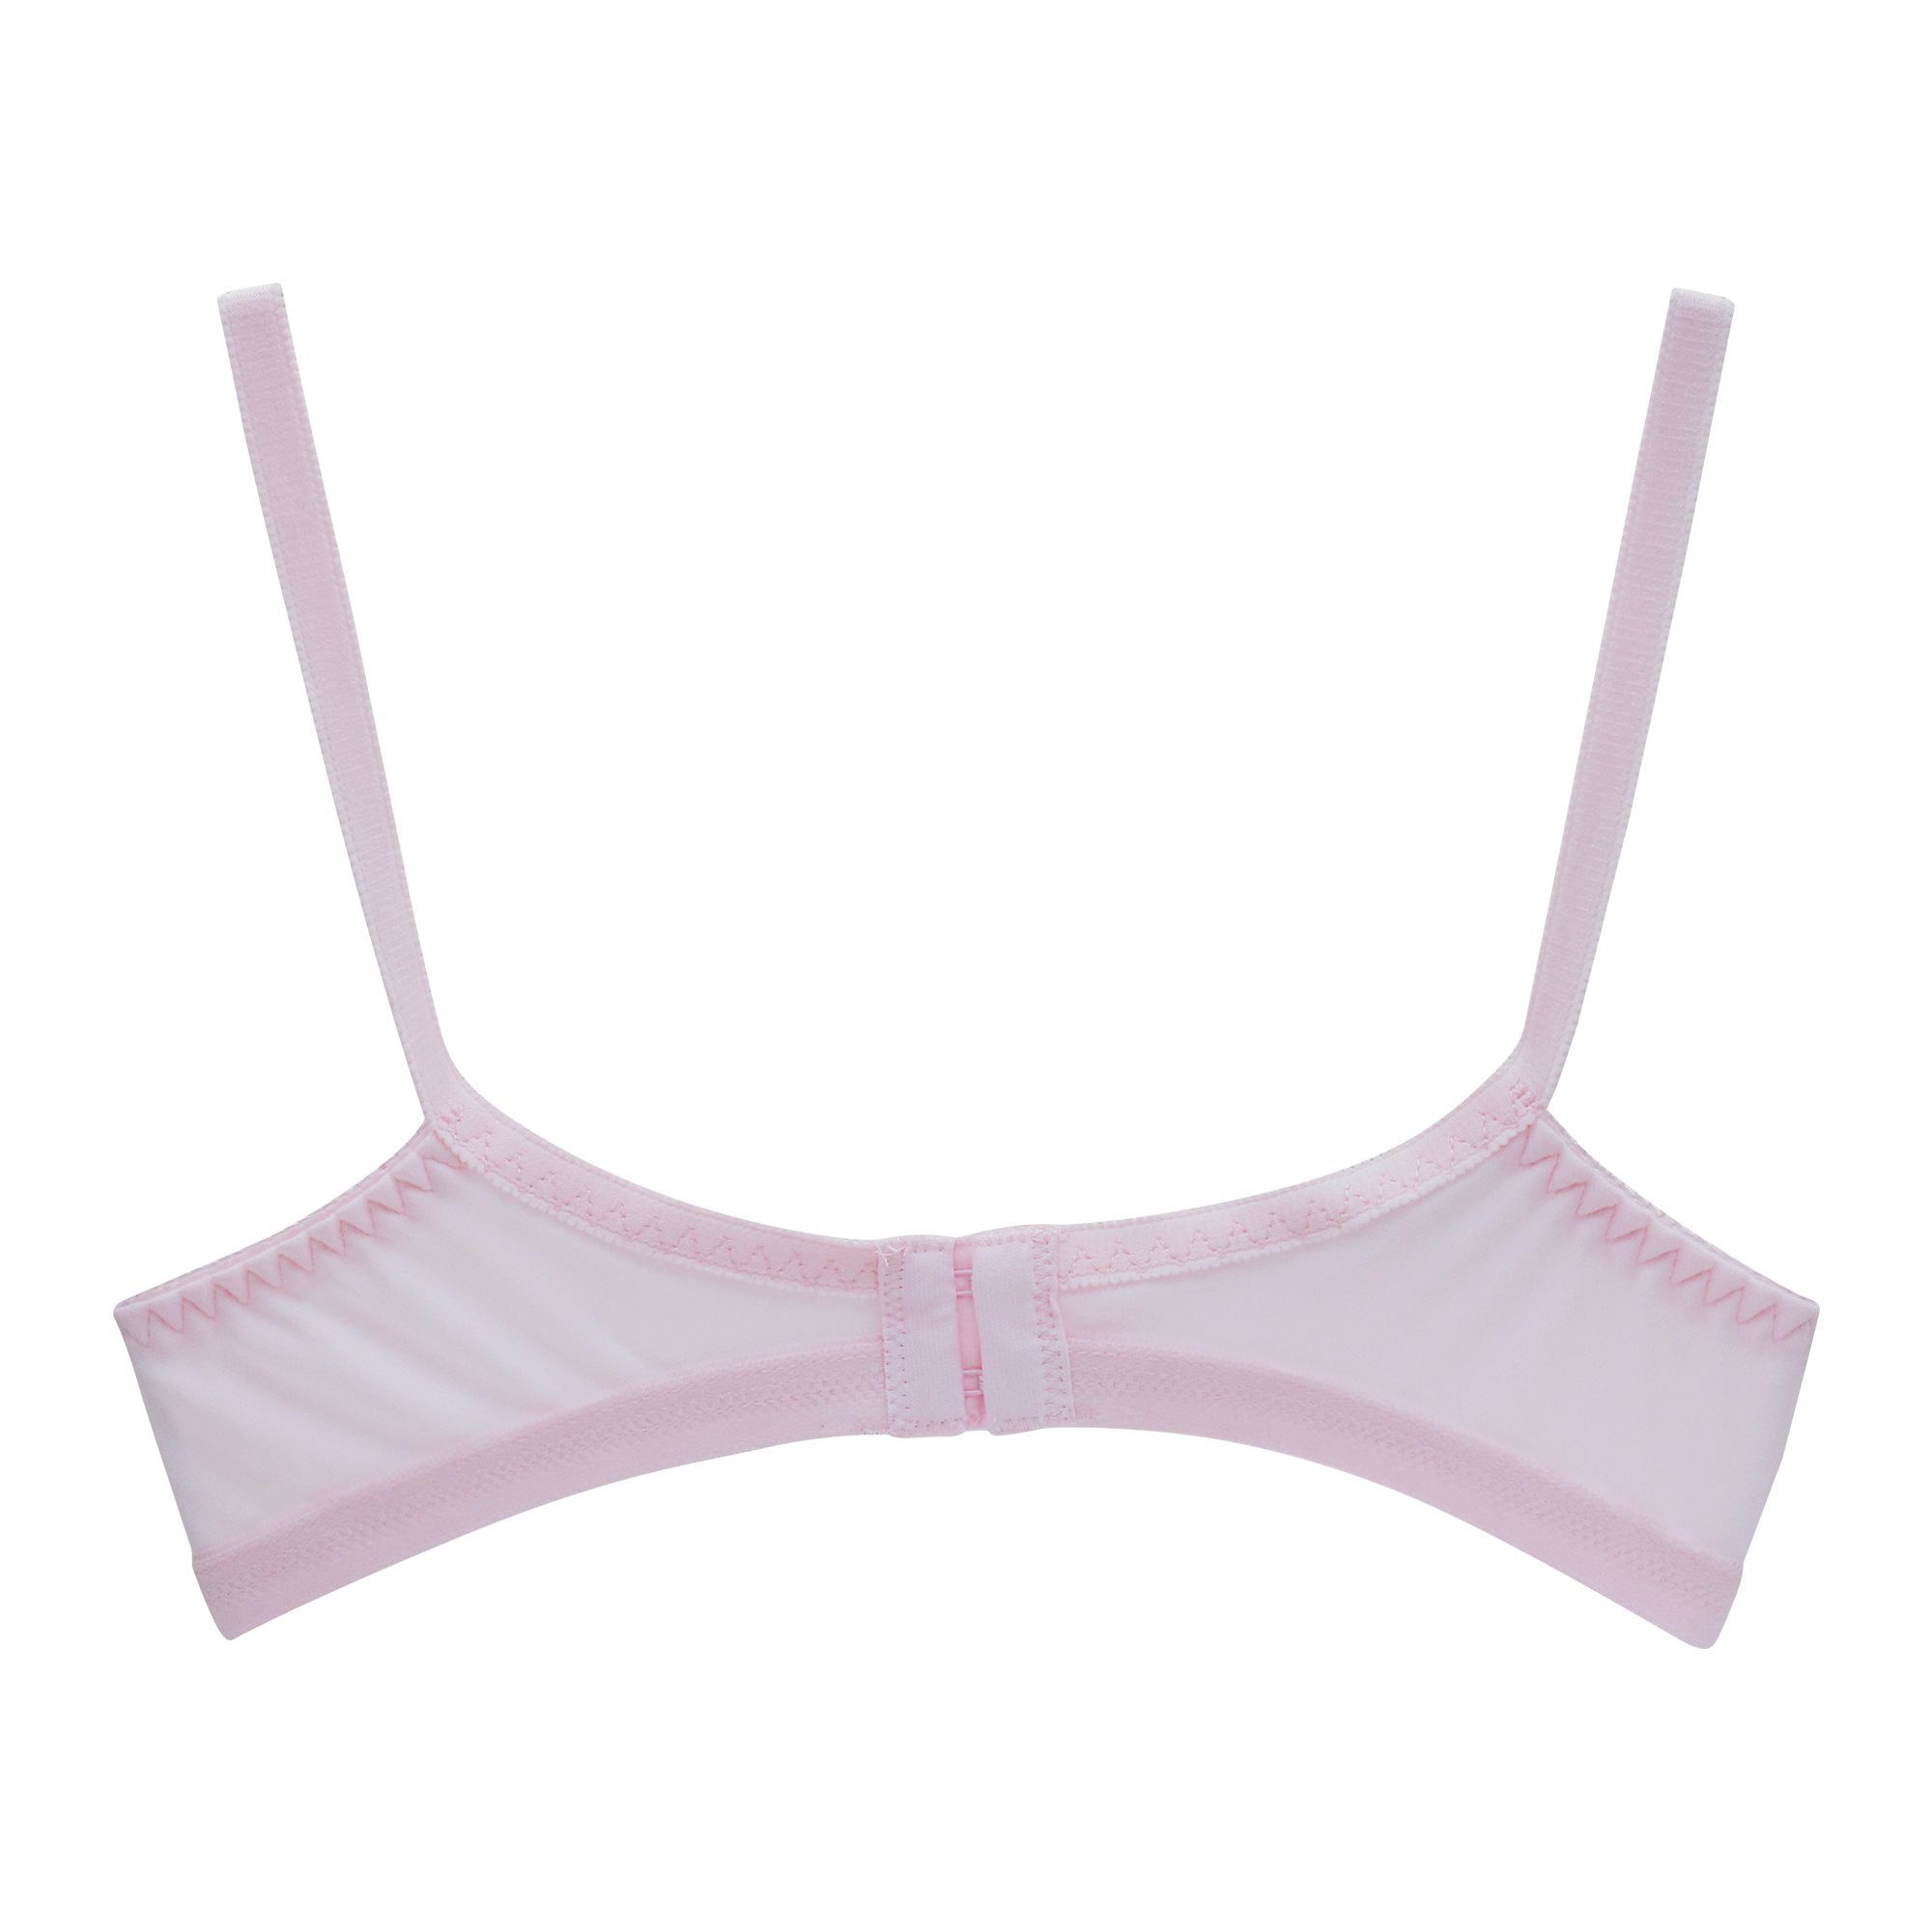 Purchase IFG Mystique N Bra, Pink Online at Special Price in